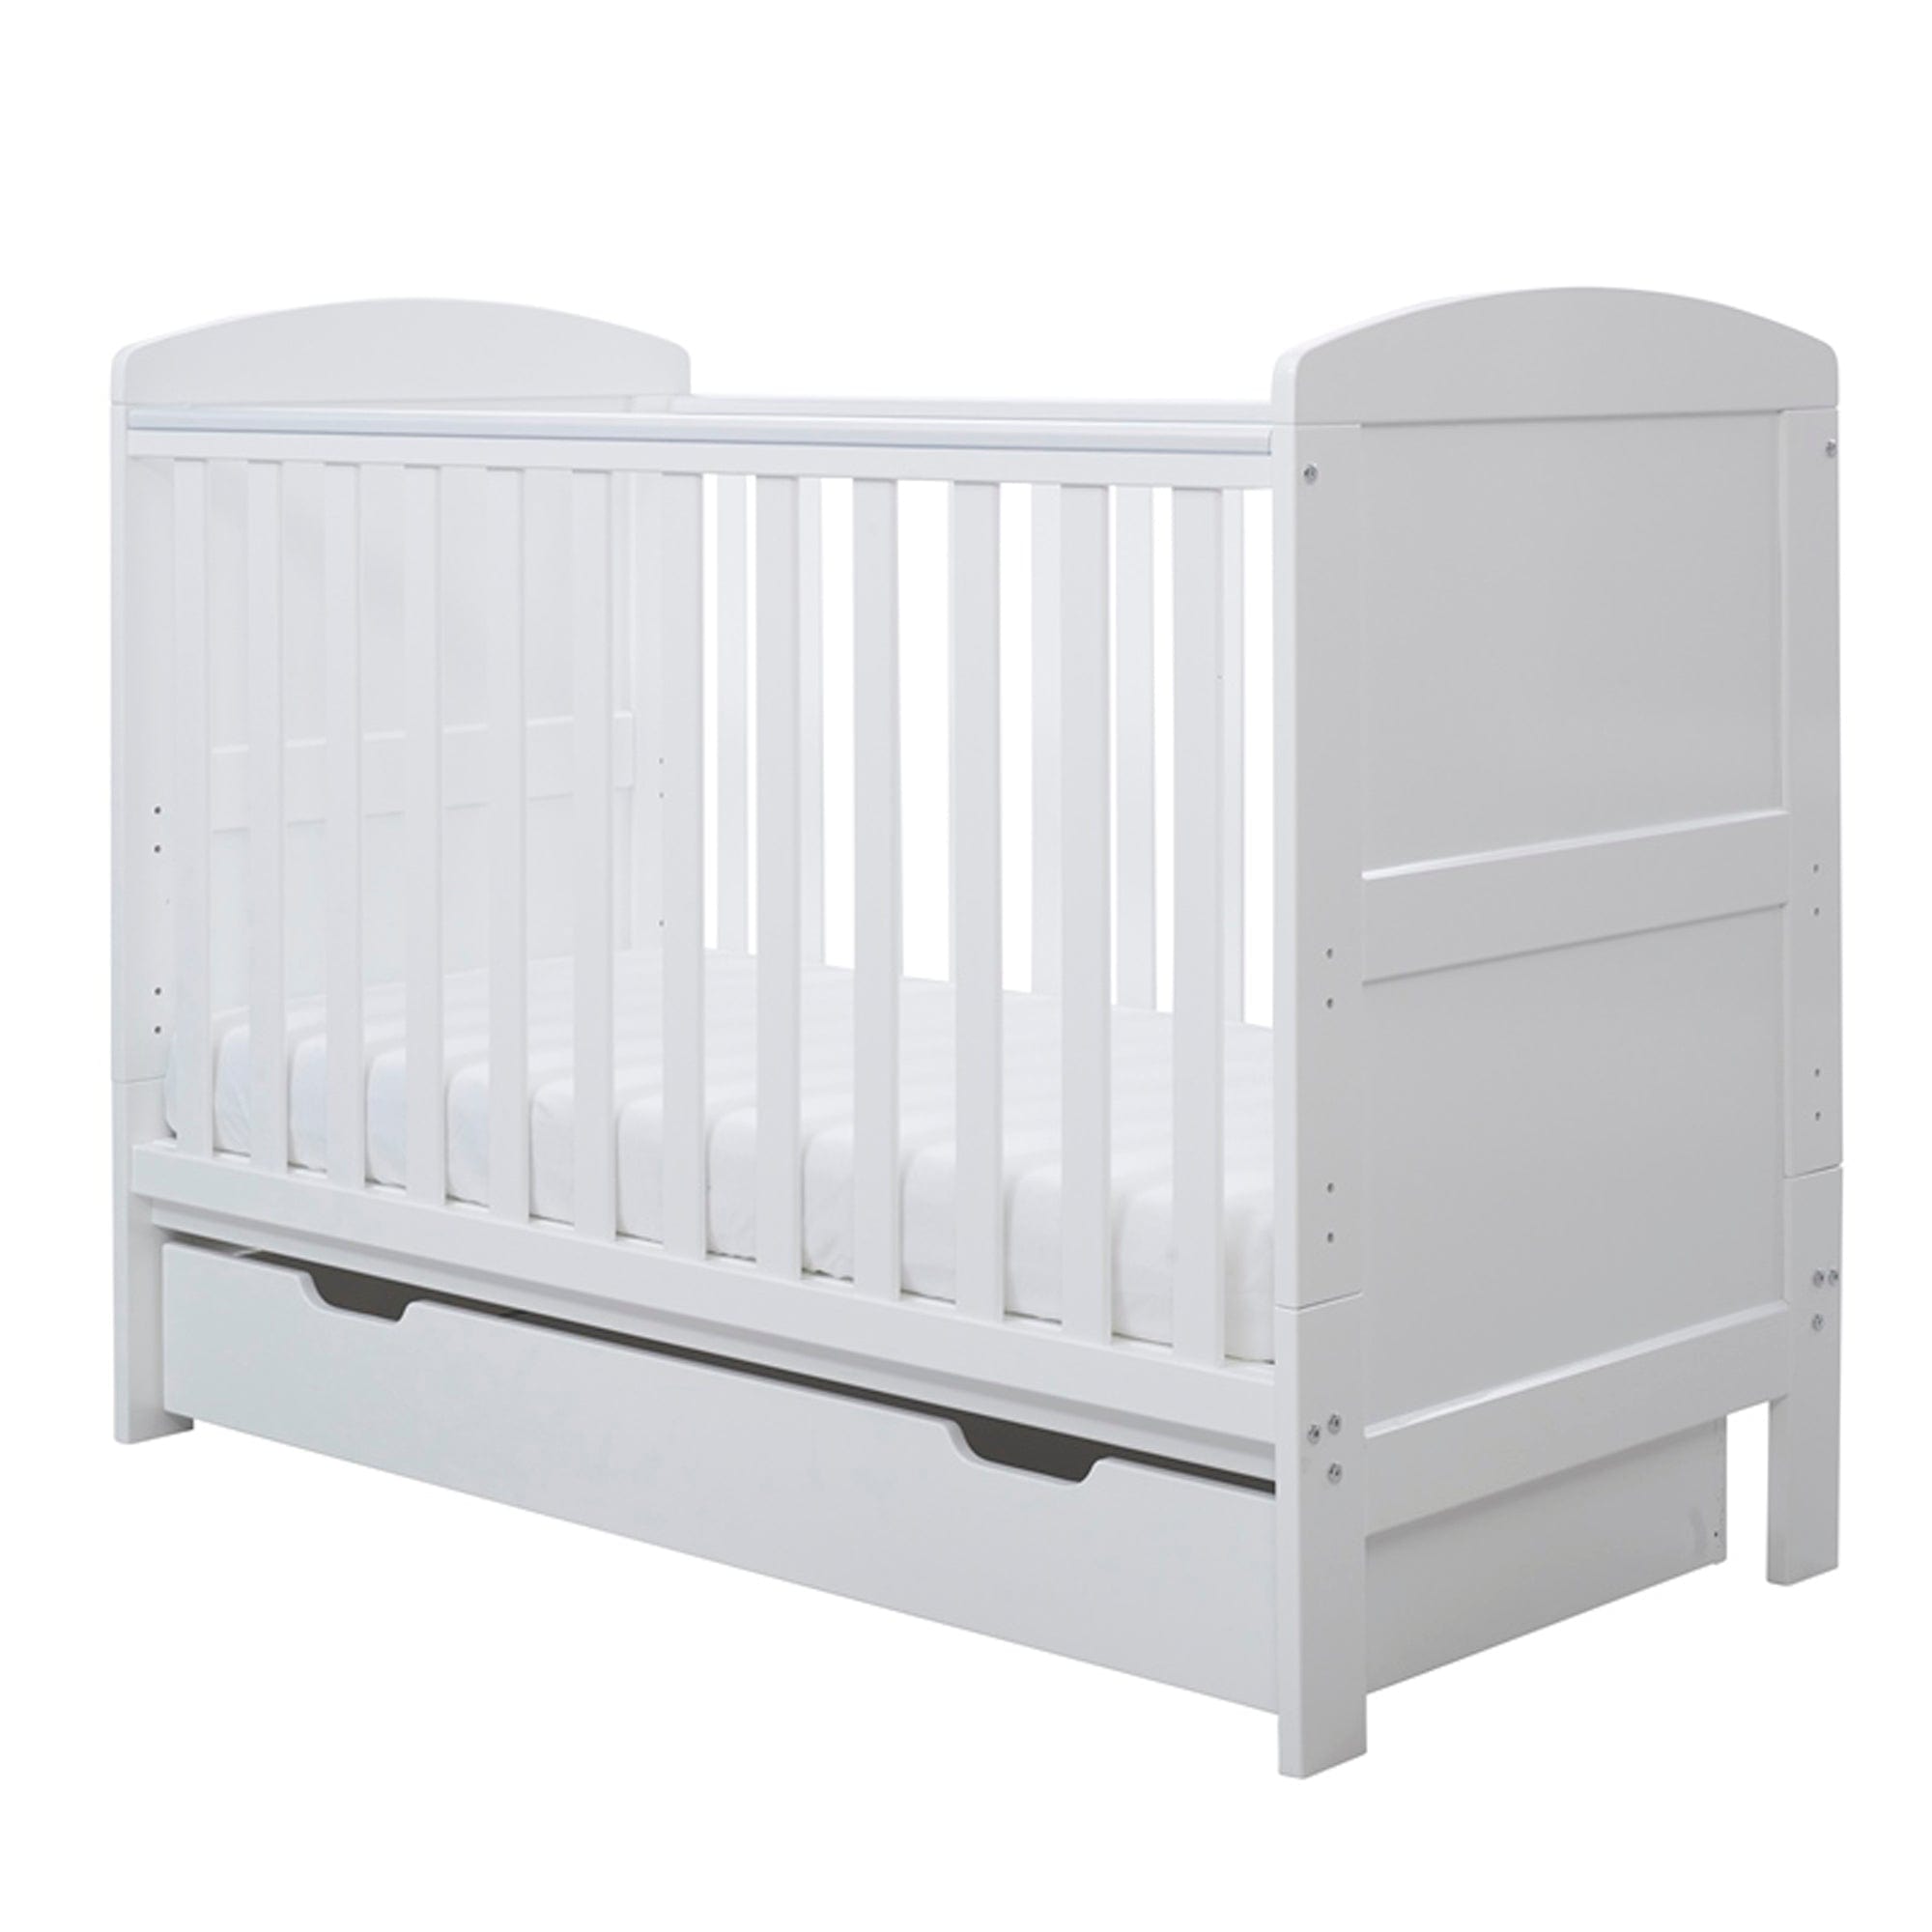 Ickle Bubba Nursery Room Sets Ickle Bubba Coleby Mini 2 Piece Furniture & Under Drawer White